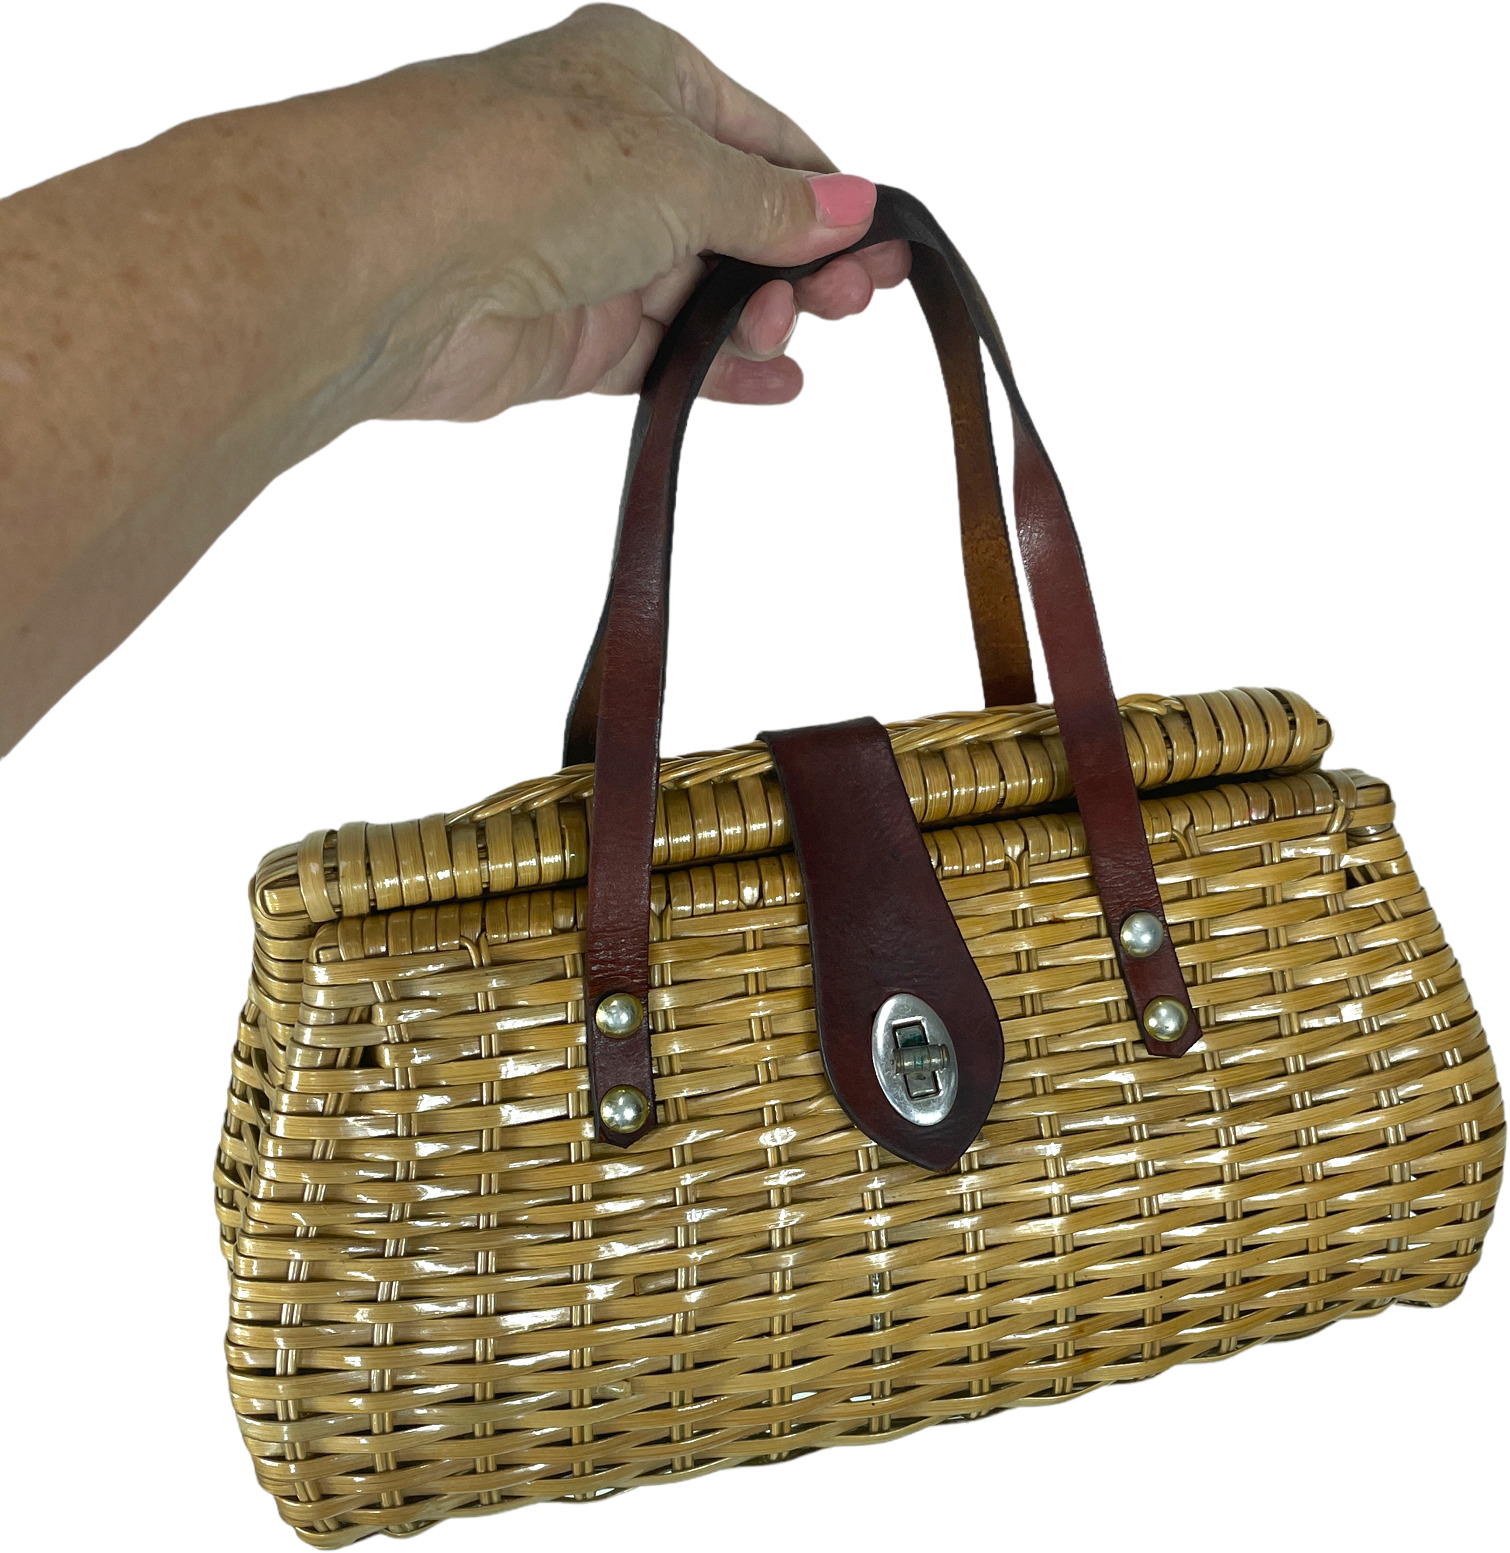 VINTAGE WICKER PURSE HAND MADE IN HONG KONG ANTIQUE PURSE